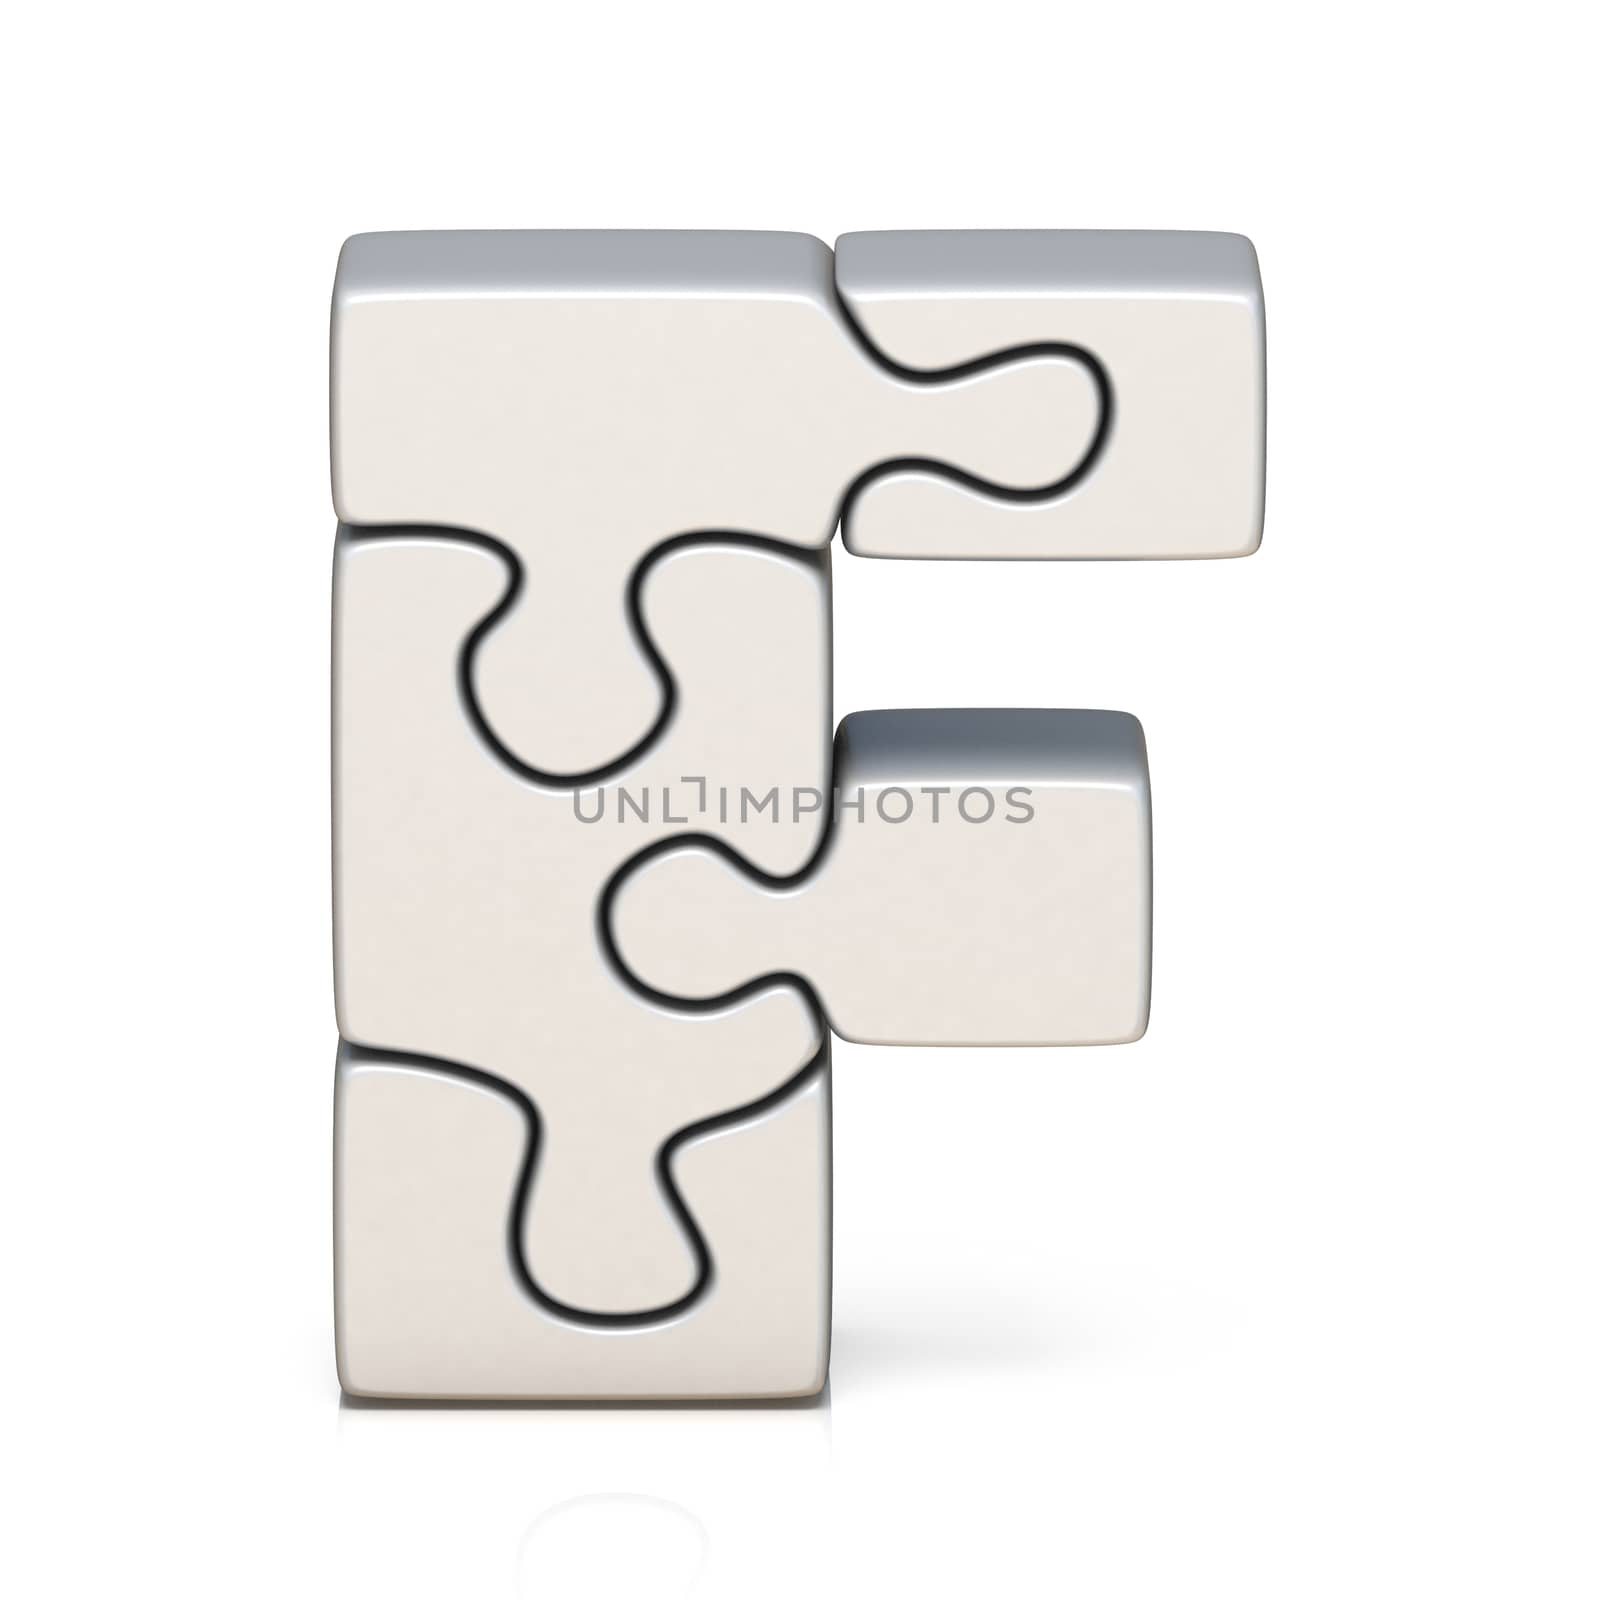 White puzzle jigsaw letter F 3D render illustration isolated on white background